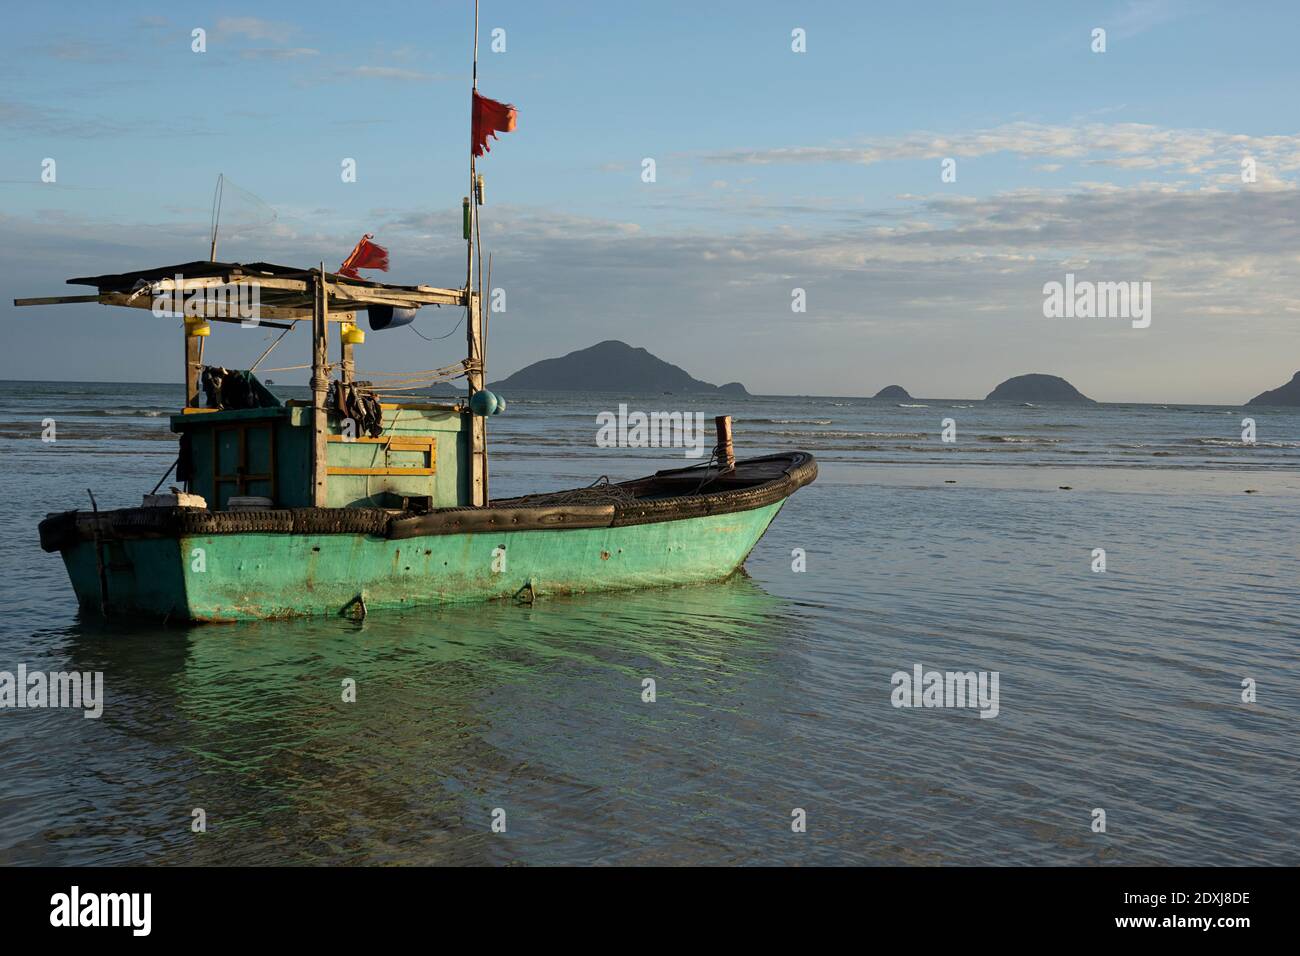 Small fishing boat on the beach at low tide in Vietnam Stock Photo